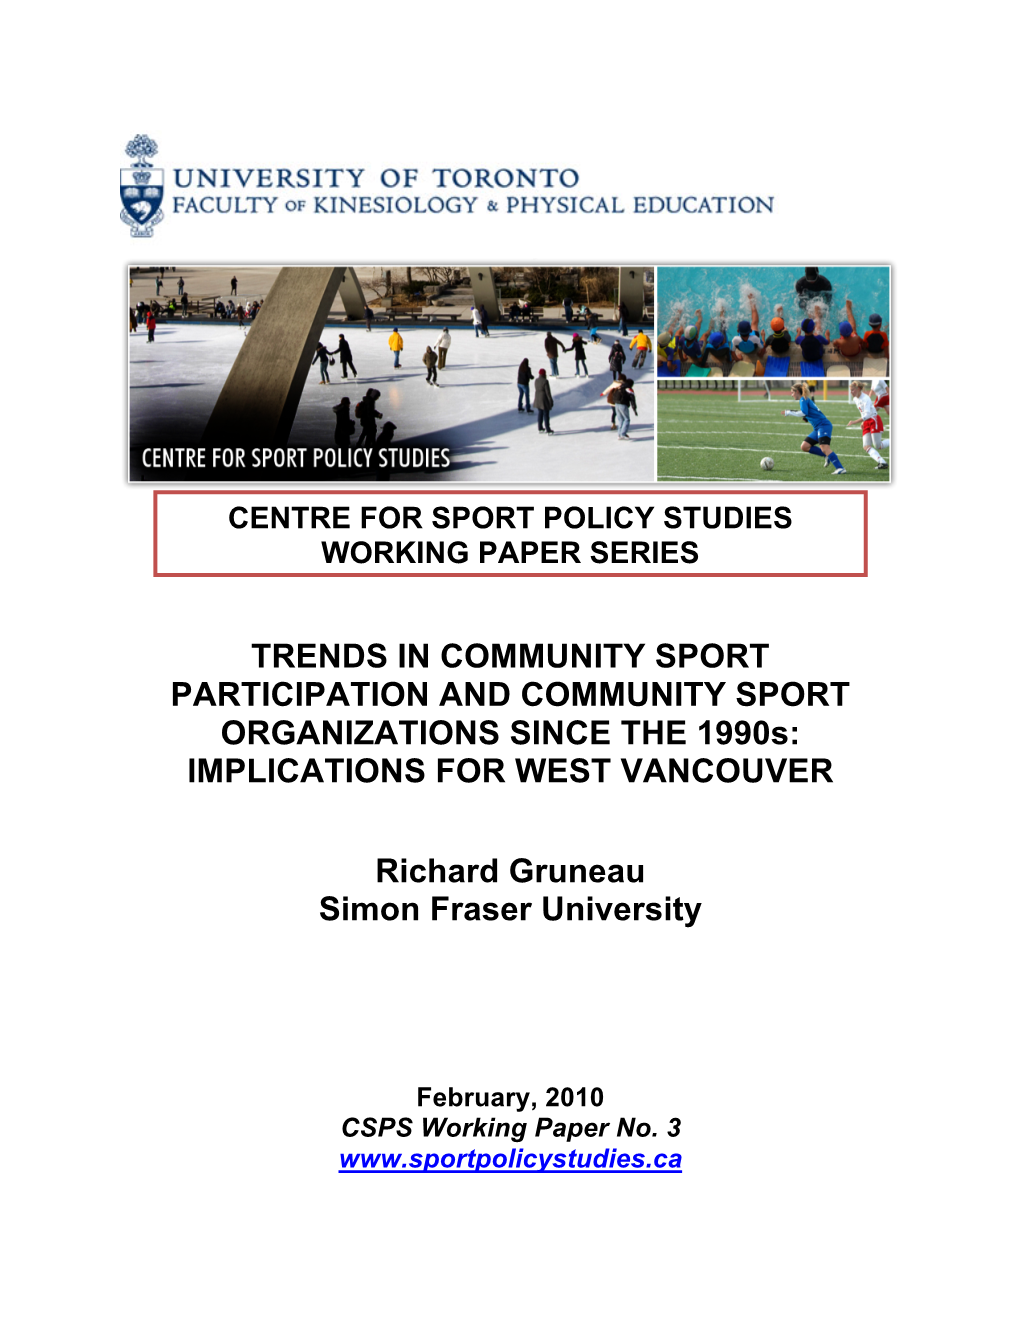 TRENDS in COMMUNITY SPORT PARTICIPATION and COMMUNITY SPORT ORGANIZATIONS SINCE the 1990S: IMPLICATIONS for WEST VANCOUVER